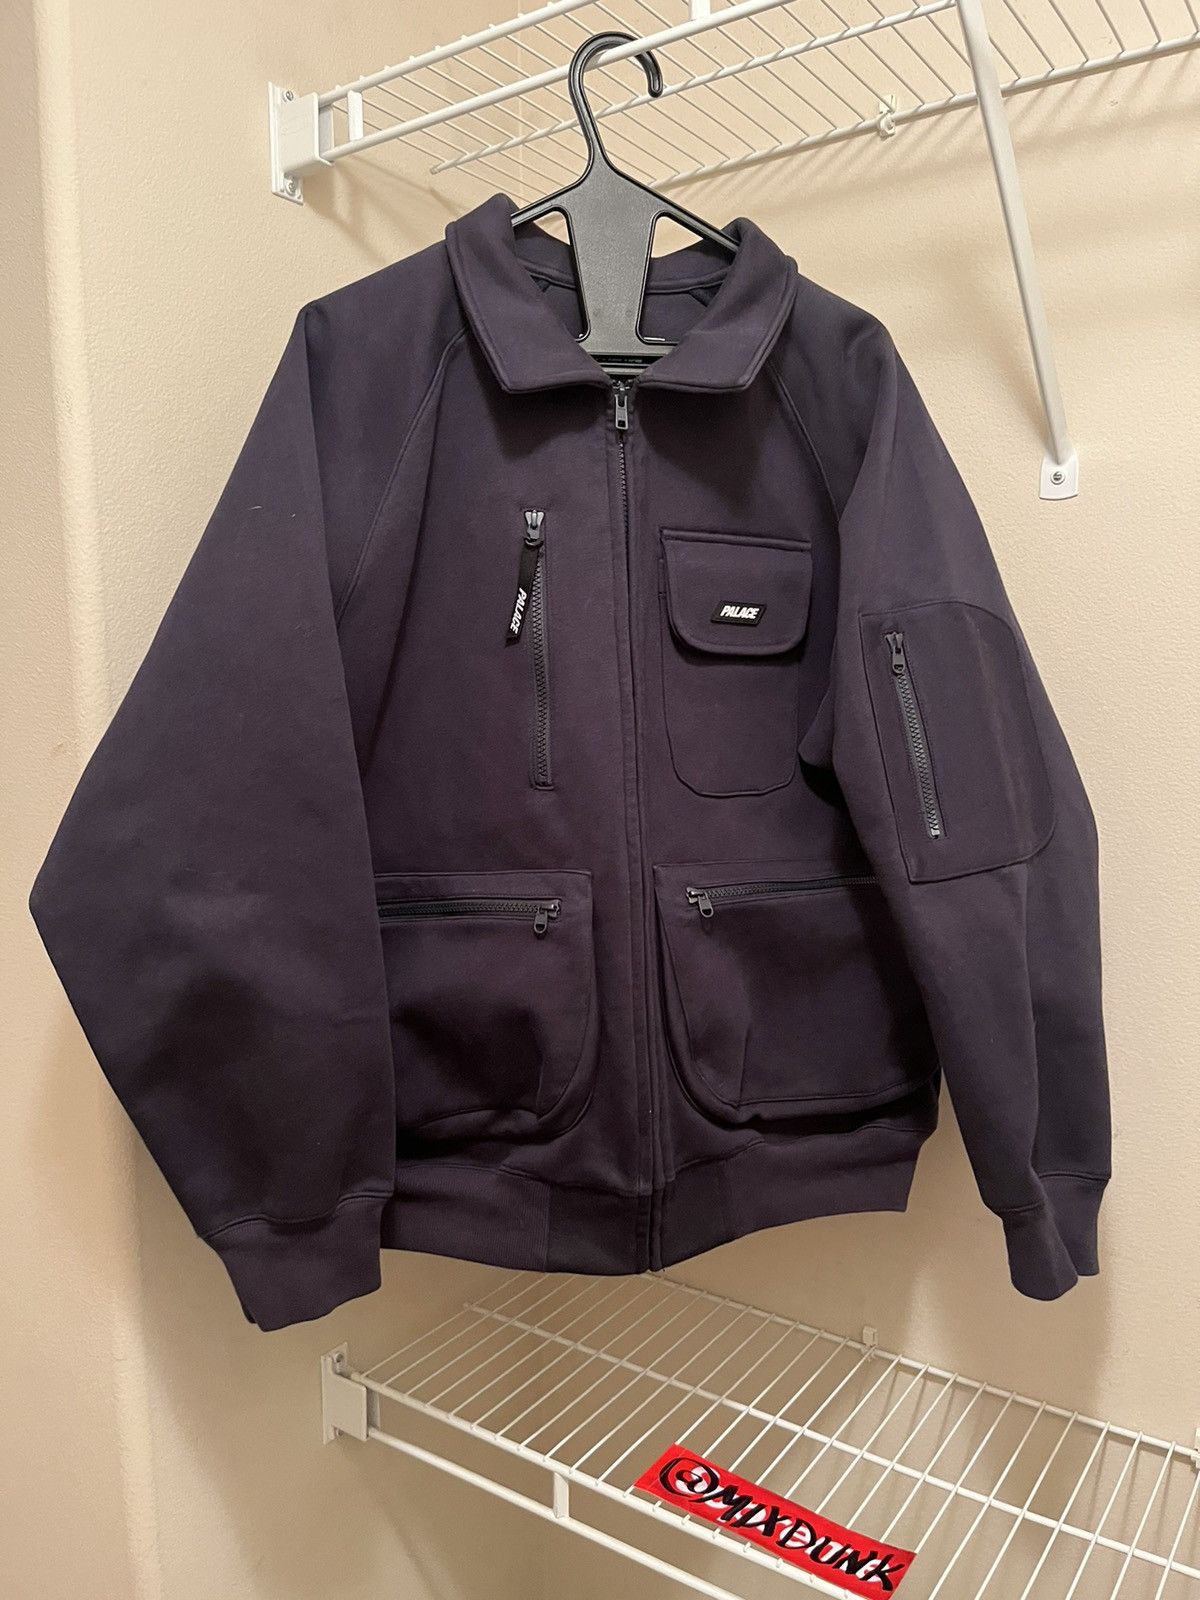 Palace Palace Thermal Bonded Bomber Navy | Grailed